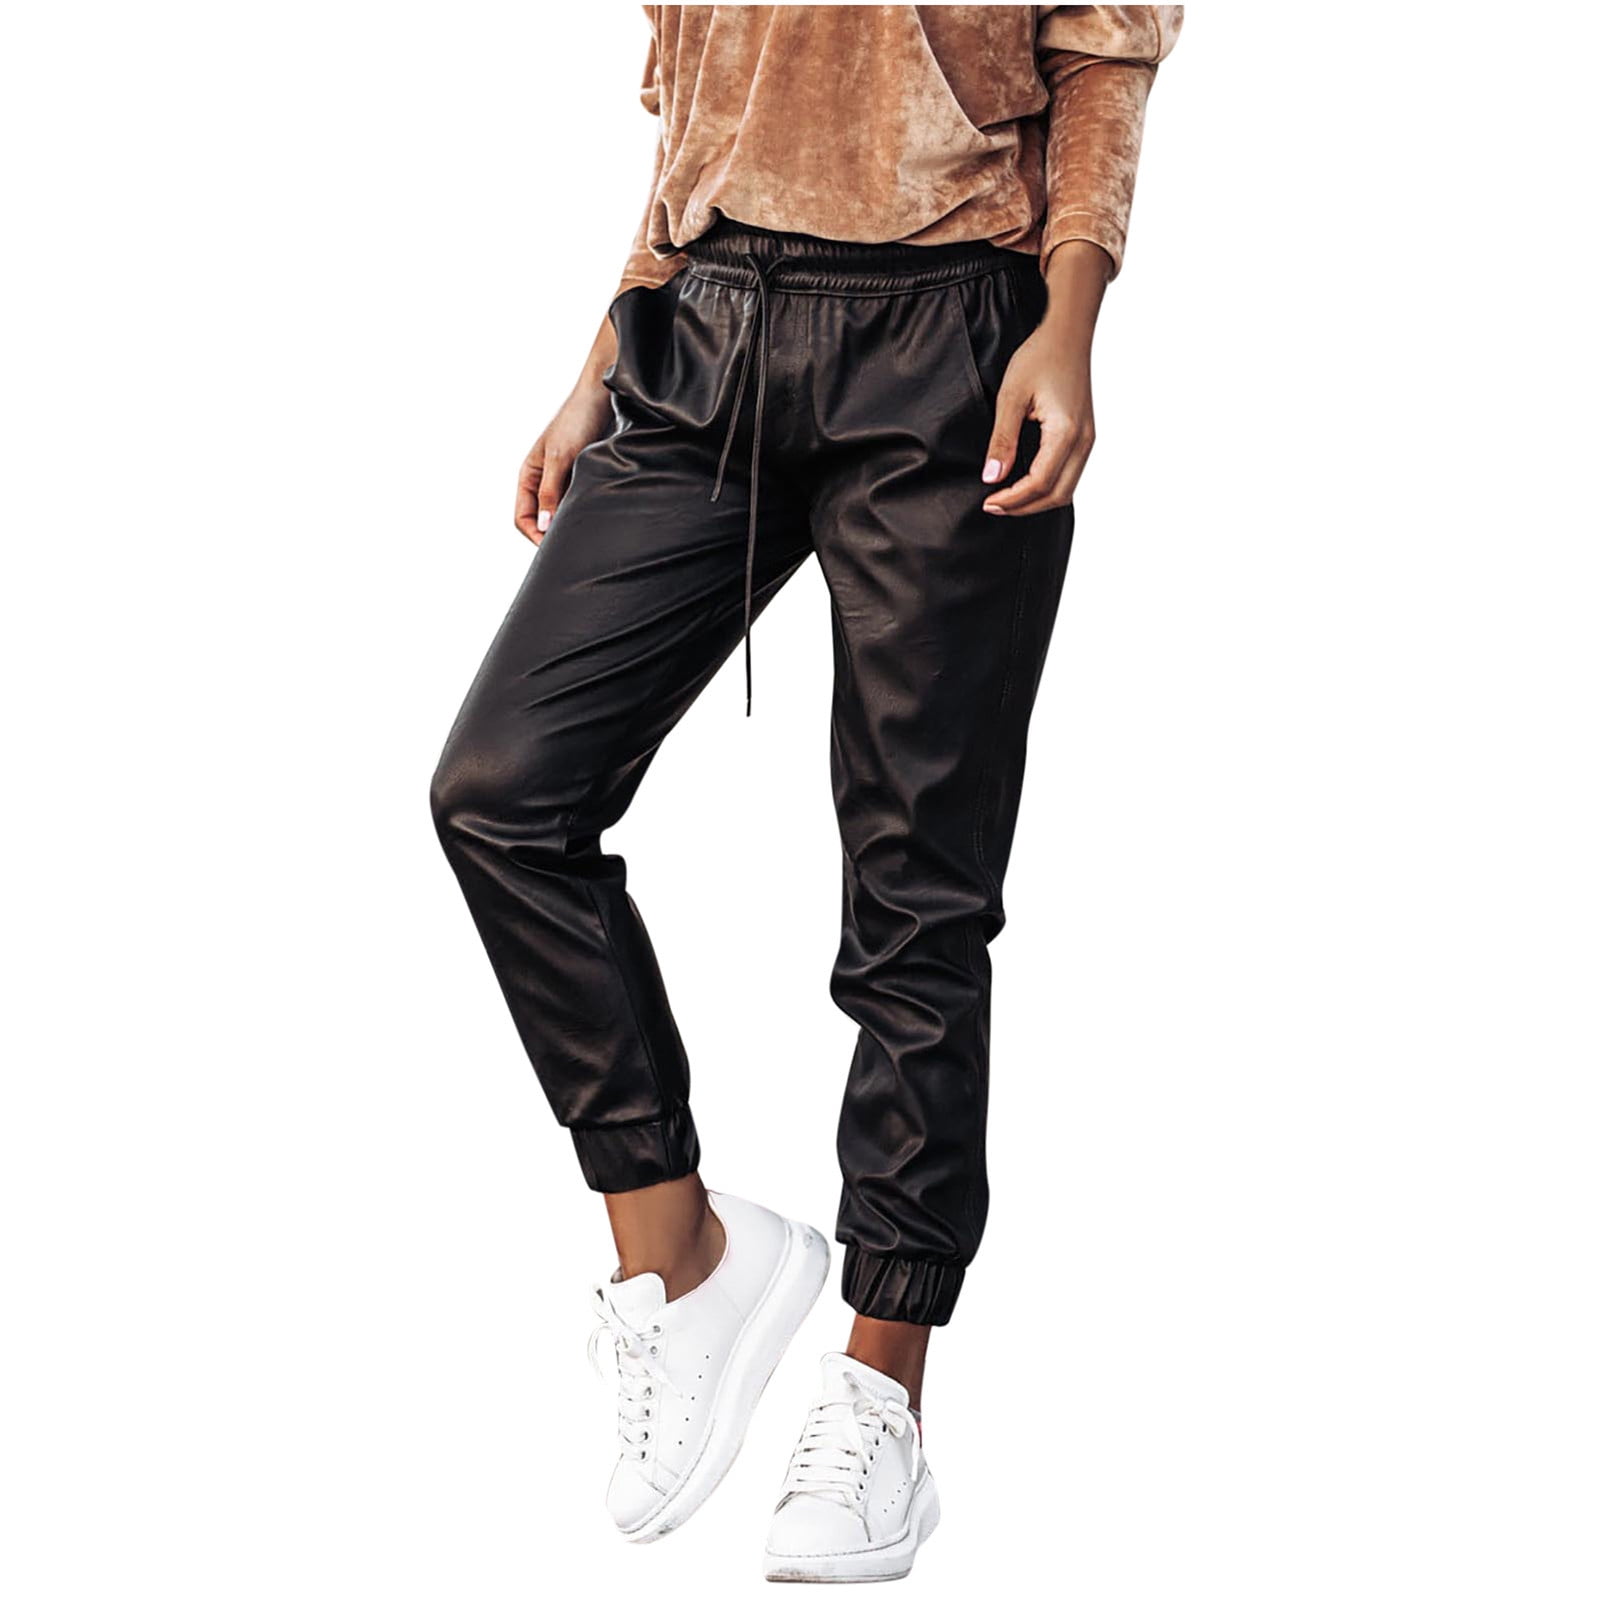 Mrat Full Length Pants Women's Relaxed Fit Pants Fashion Ladies Solid  Pockets Drawstring Casual Mid Waist Leather Long Pants Female Flare Pant